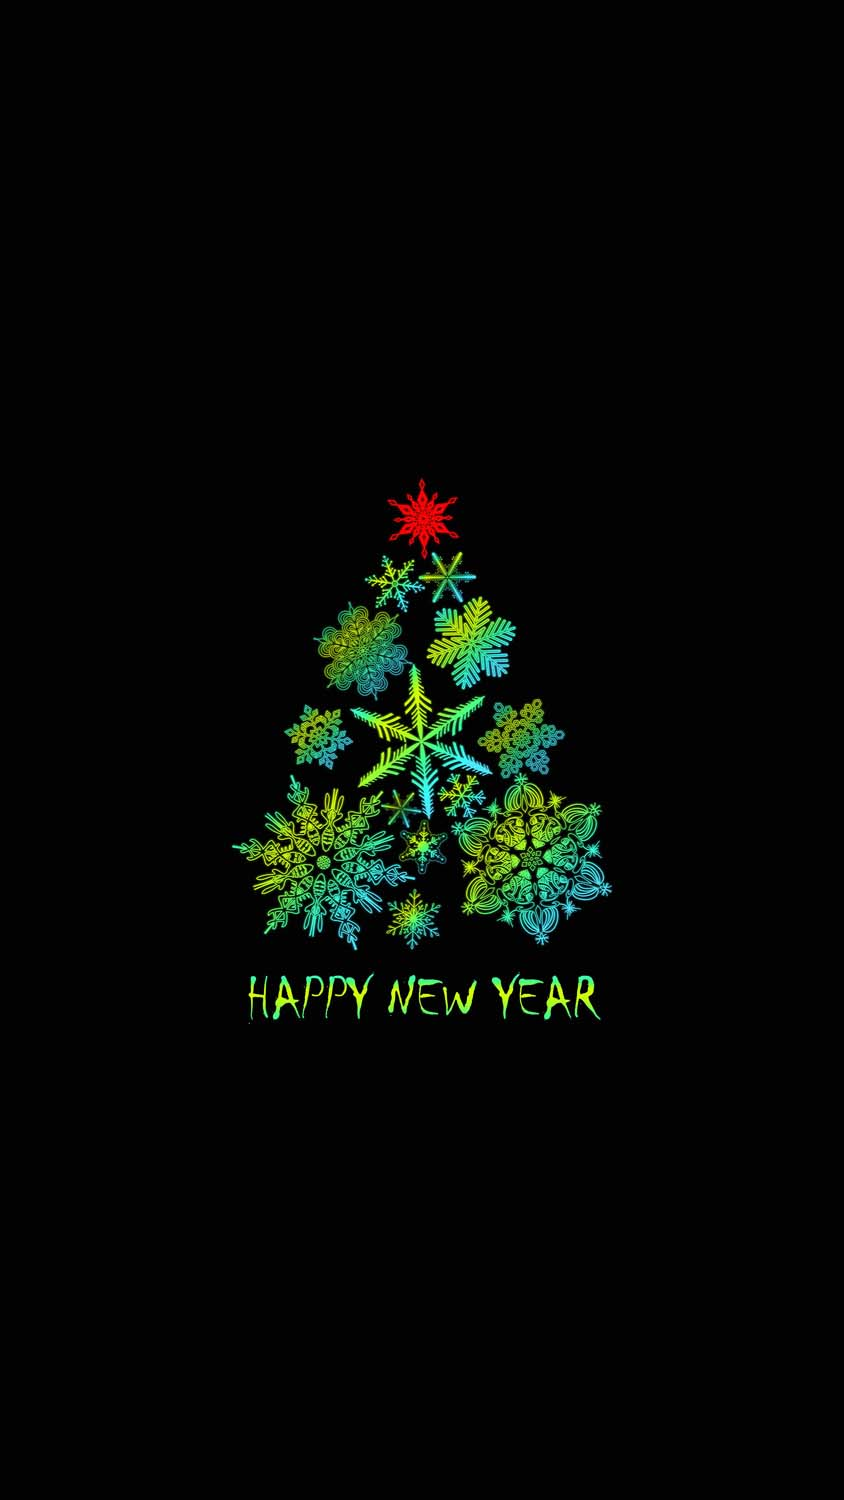 Happy New Year Christmas IPhone Wallpaper HD 1  IPhone Wallpapers